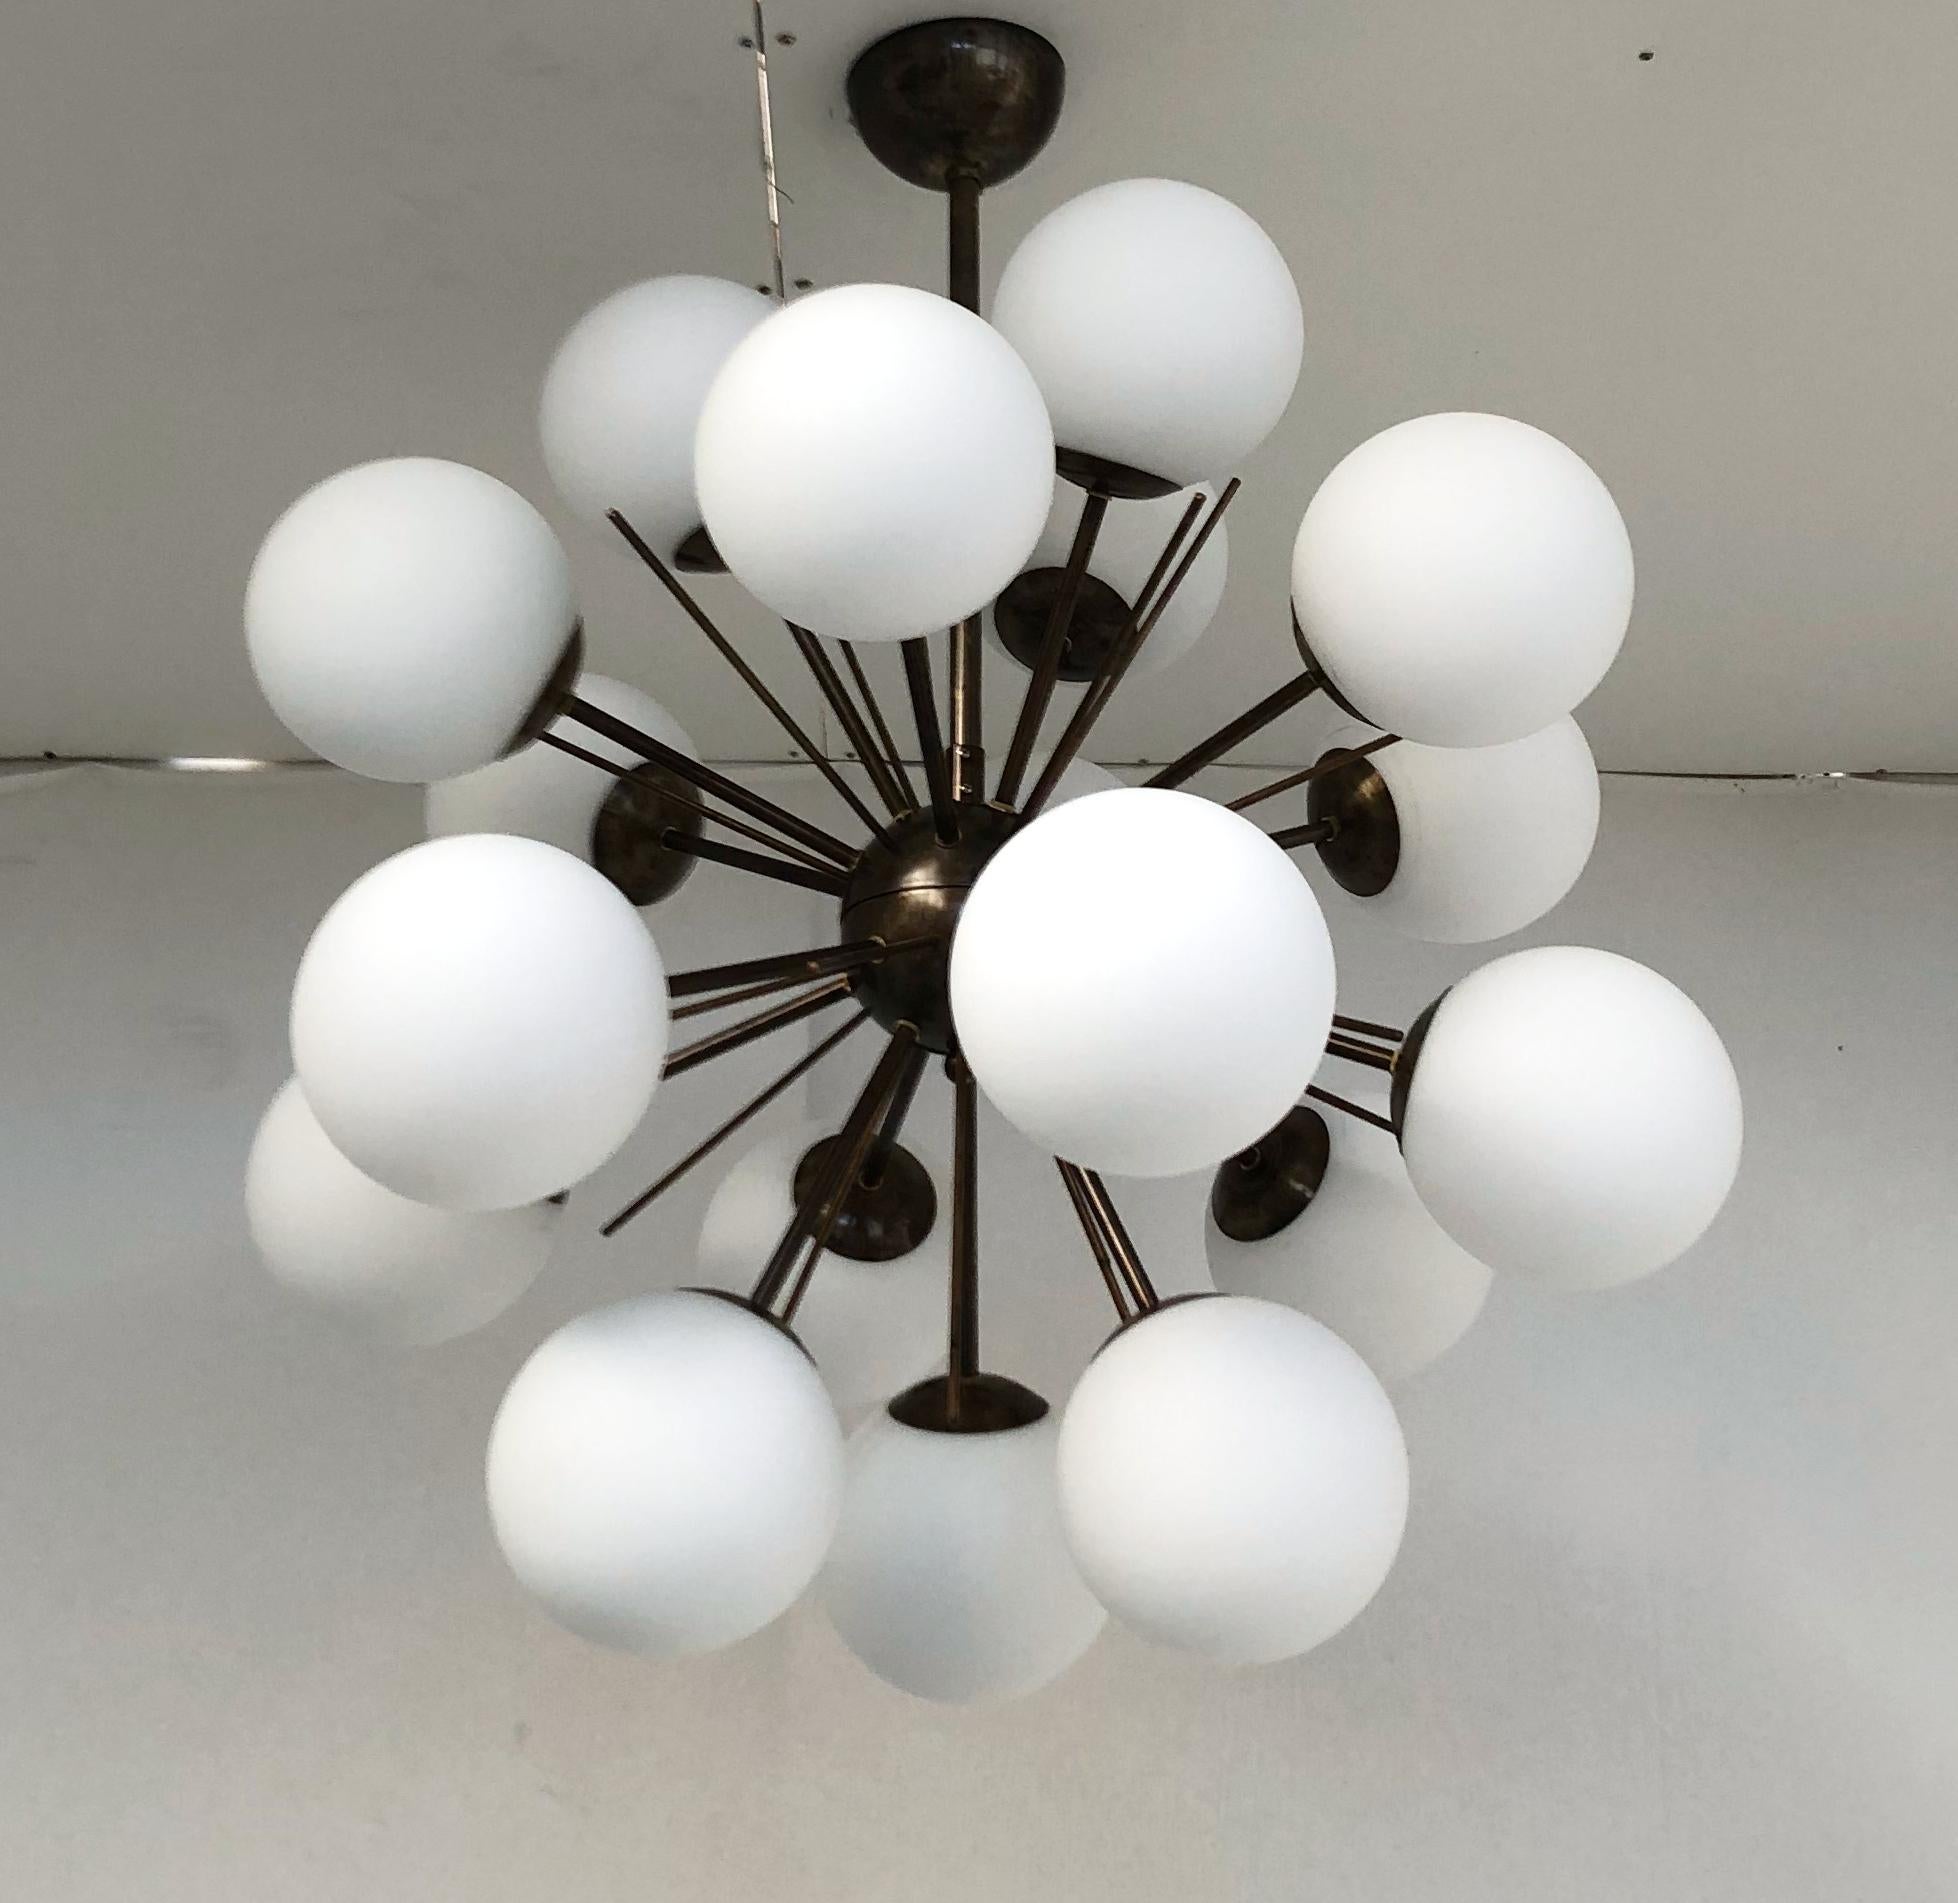 Italian sputnik chandelier with 18 Murano glass globes mounted on brass frame / Designed by Fabio Bergomi for Fabio Ltd / Made in Italy
18 lights / E12 or E14 type / max 40W each
Measures: Diameter: 29 inches / Height: 32 inches including rod and